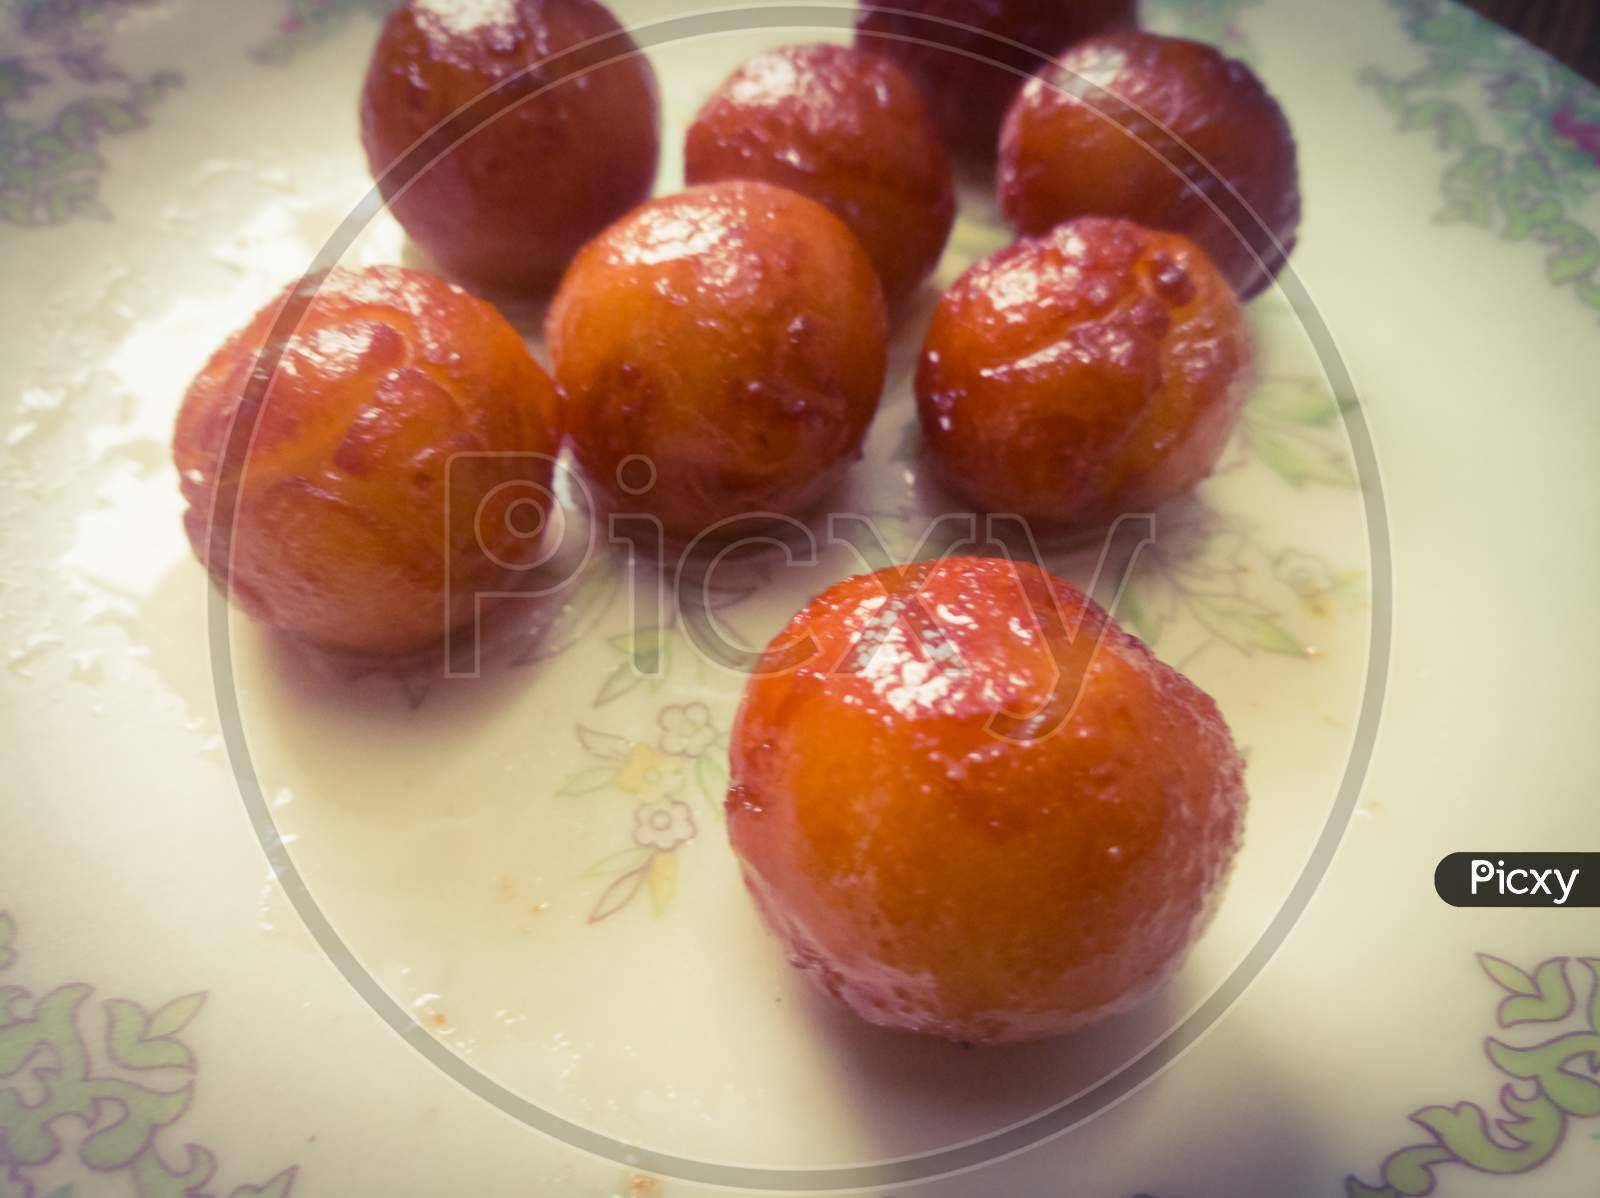 Gulab Jamun Balls With Sugar Syrup Placed In A White Plate.